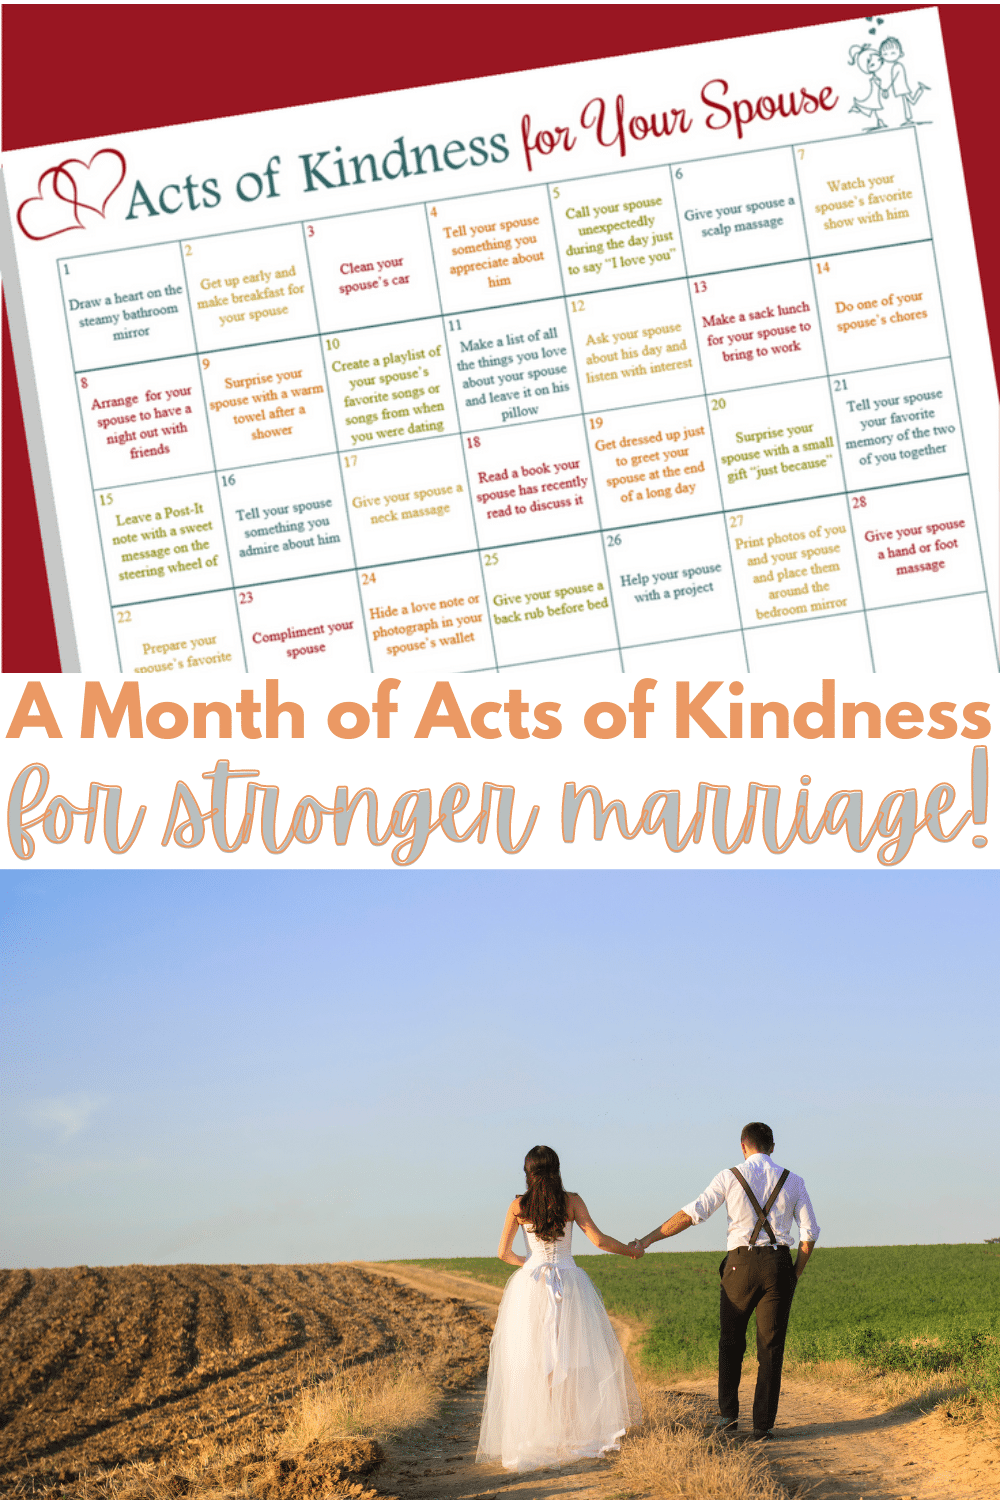 Acts of kindness don't have to be random or only for strangers. This calendar is full of acts you can do for your spouse to create a stronger marriage. #actsofkindness #marriagetips #marriageadvice via @wondermomwannab